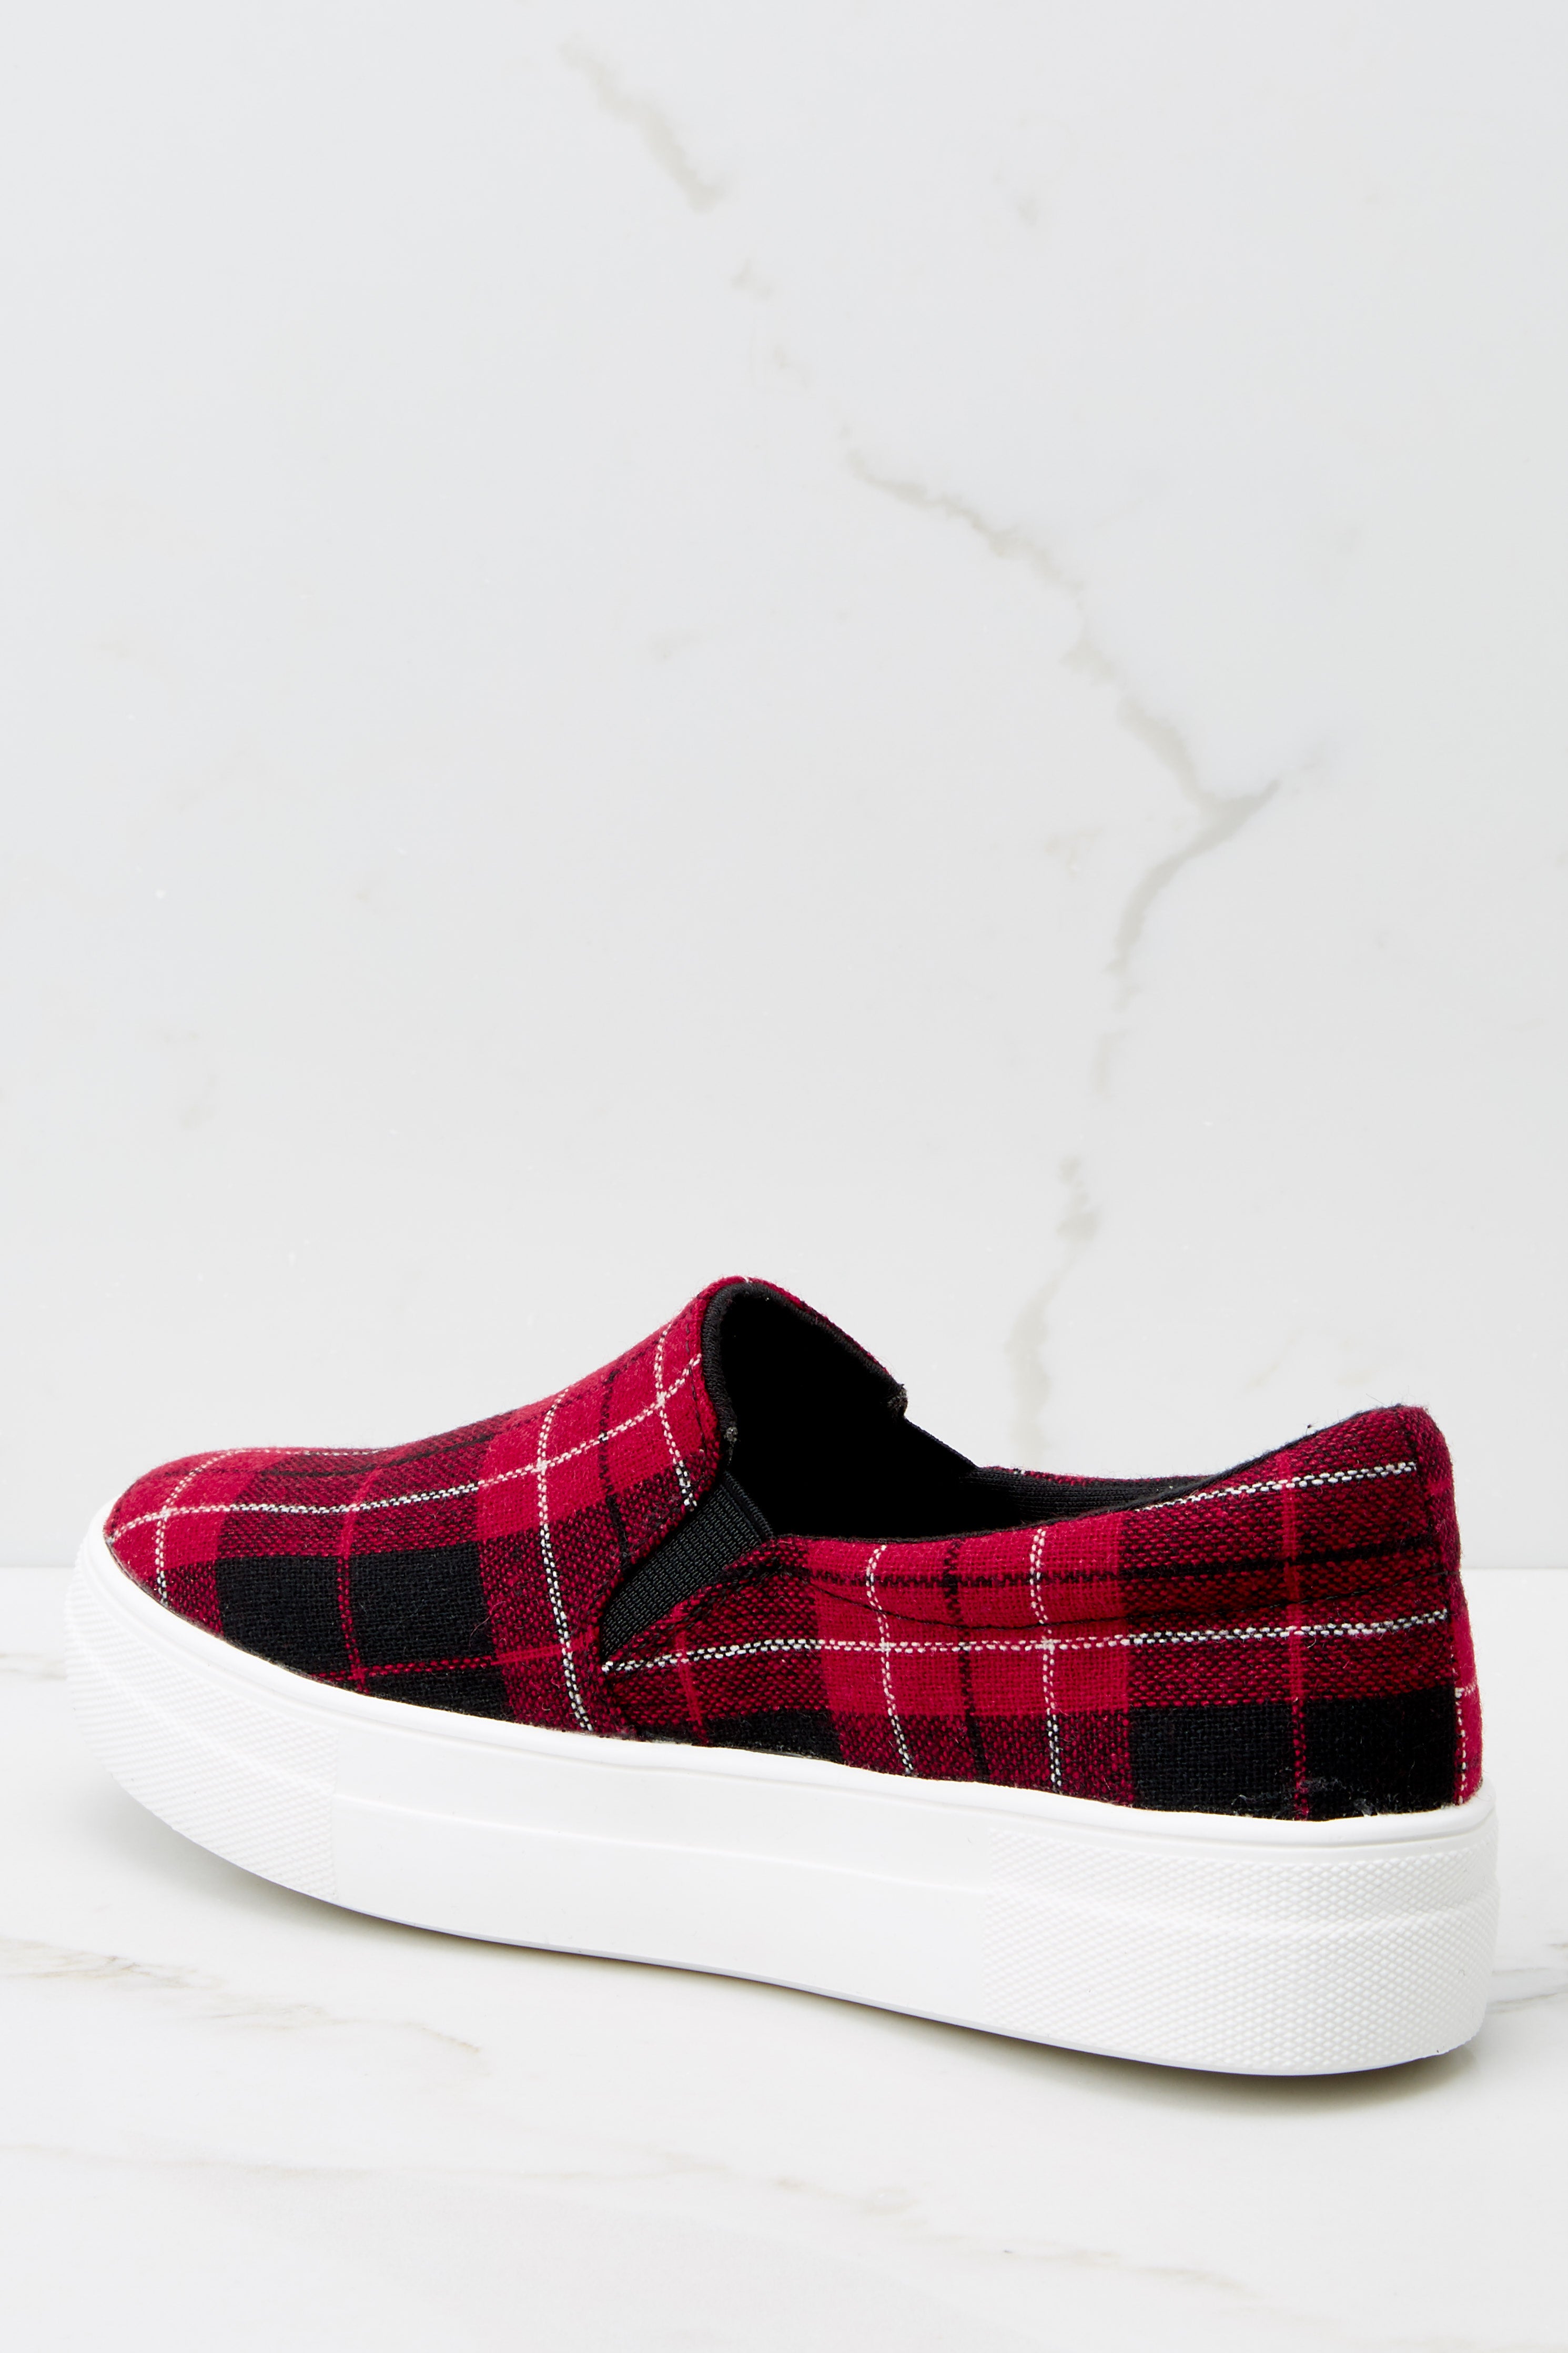 5 Go The Distance Red Plaid Slip On Sneakers at reddress.com